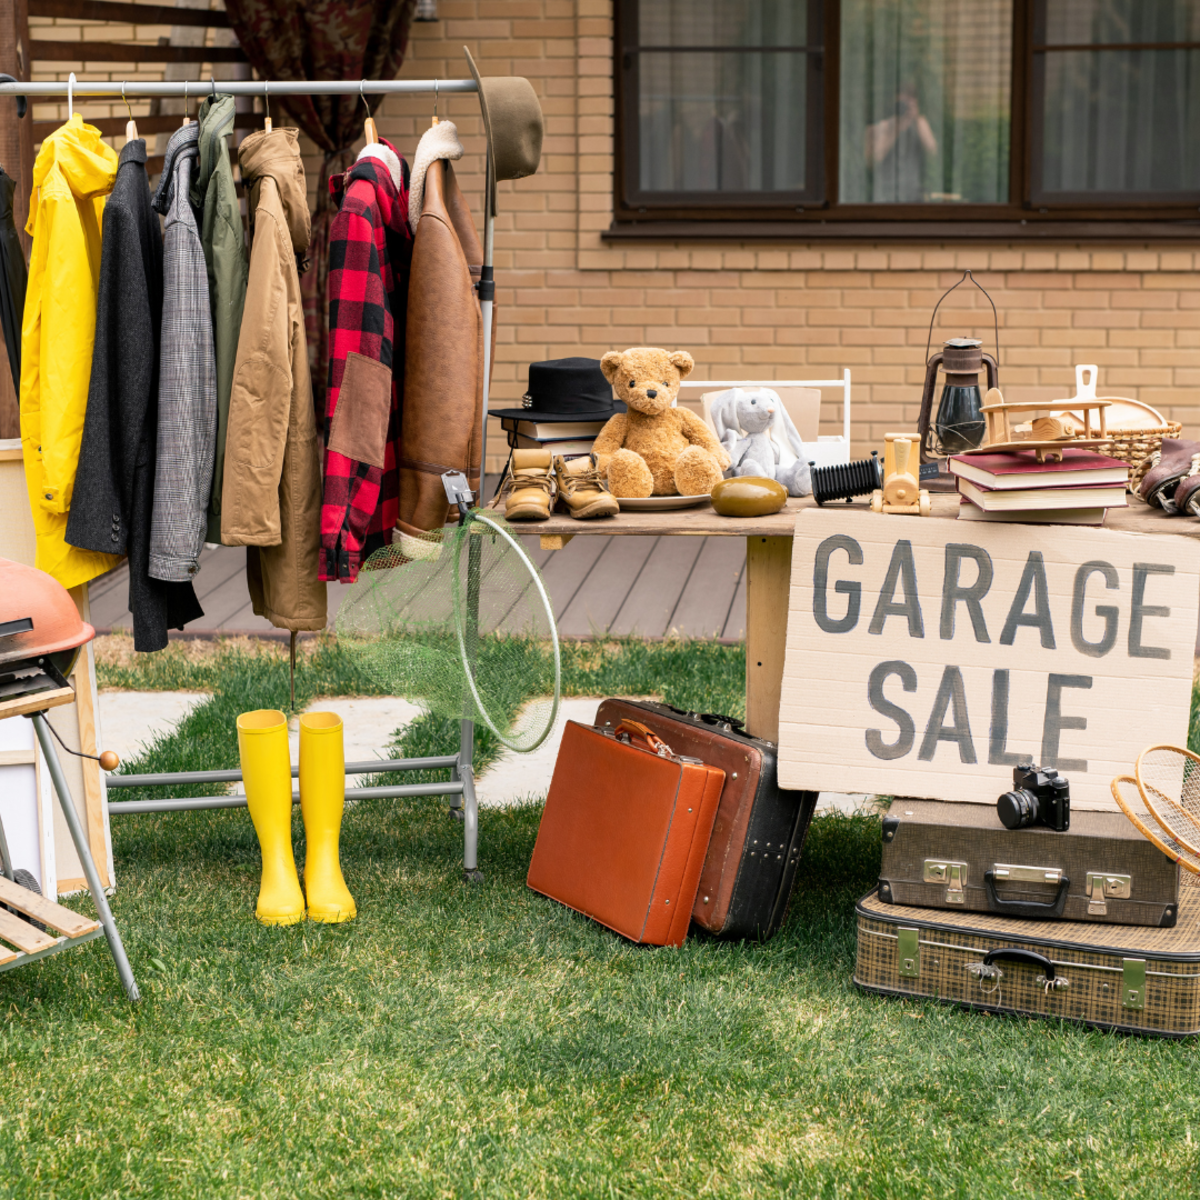 Items to avoid buying at a yard sale